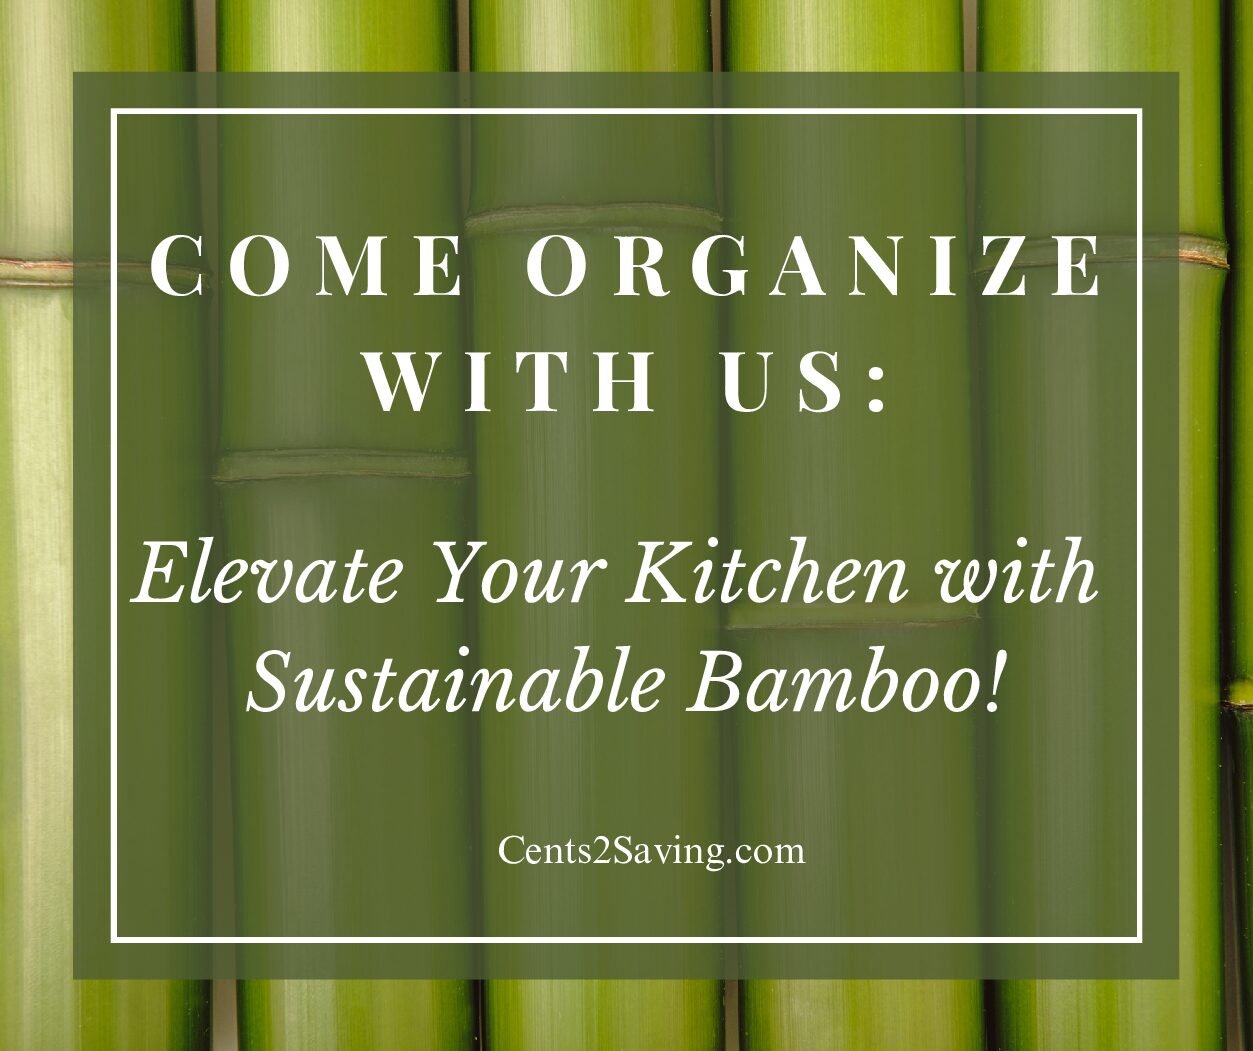 Come Organize with Us: Elevate Your Kitchen with Sustainable Bamboo!